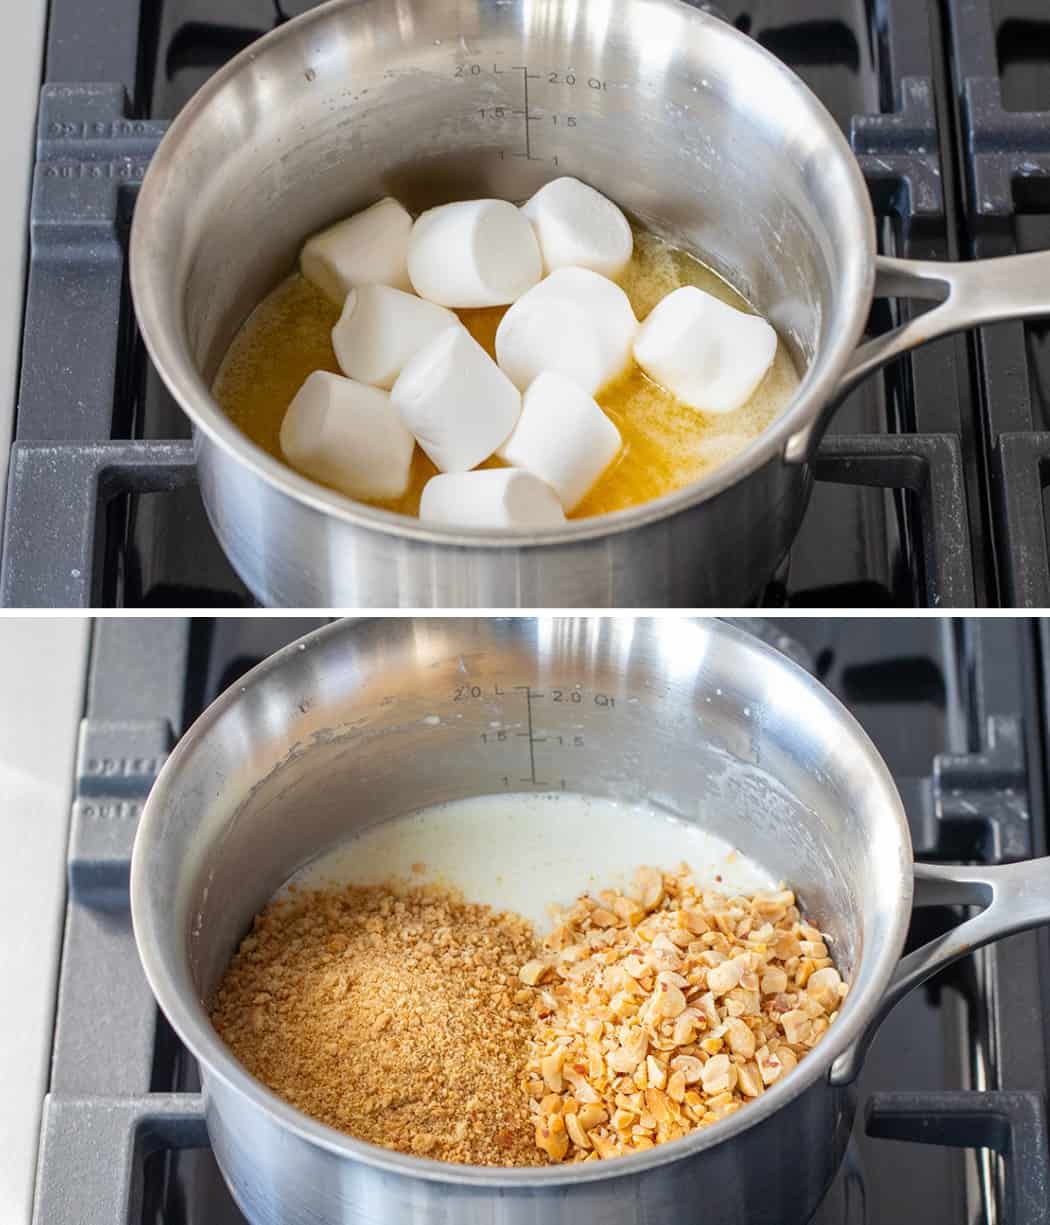 Steps for making $300 Candy, or graham cracker candy with ingredients in a pot on heat.